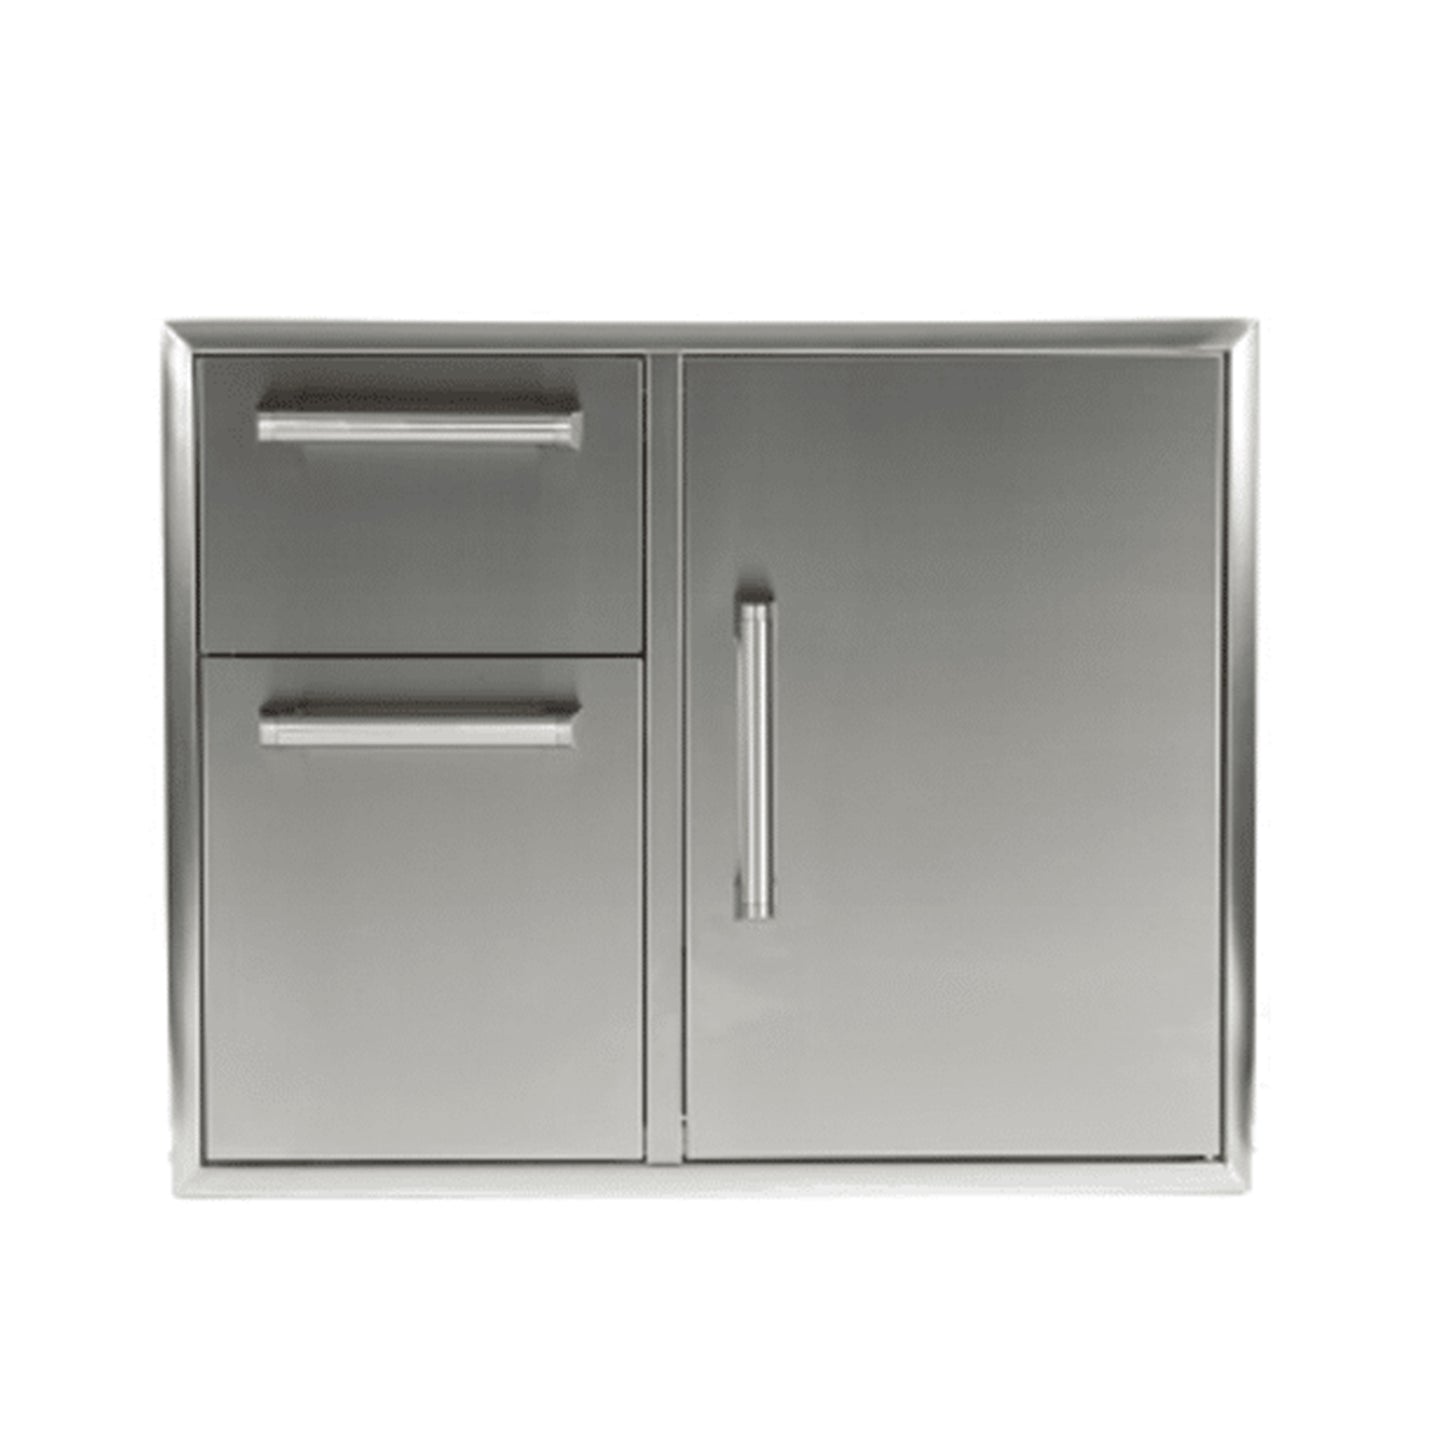 Coyote 31-Inch or 45-Inch Access Door and Drawer Combo